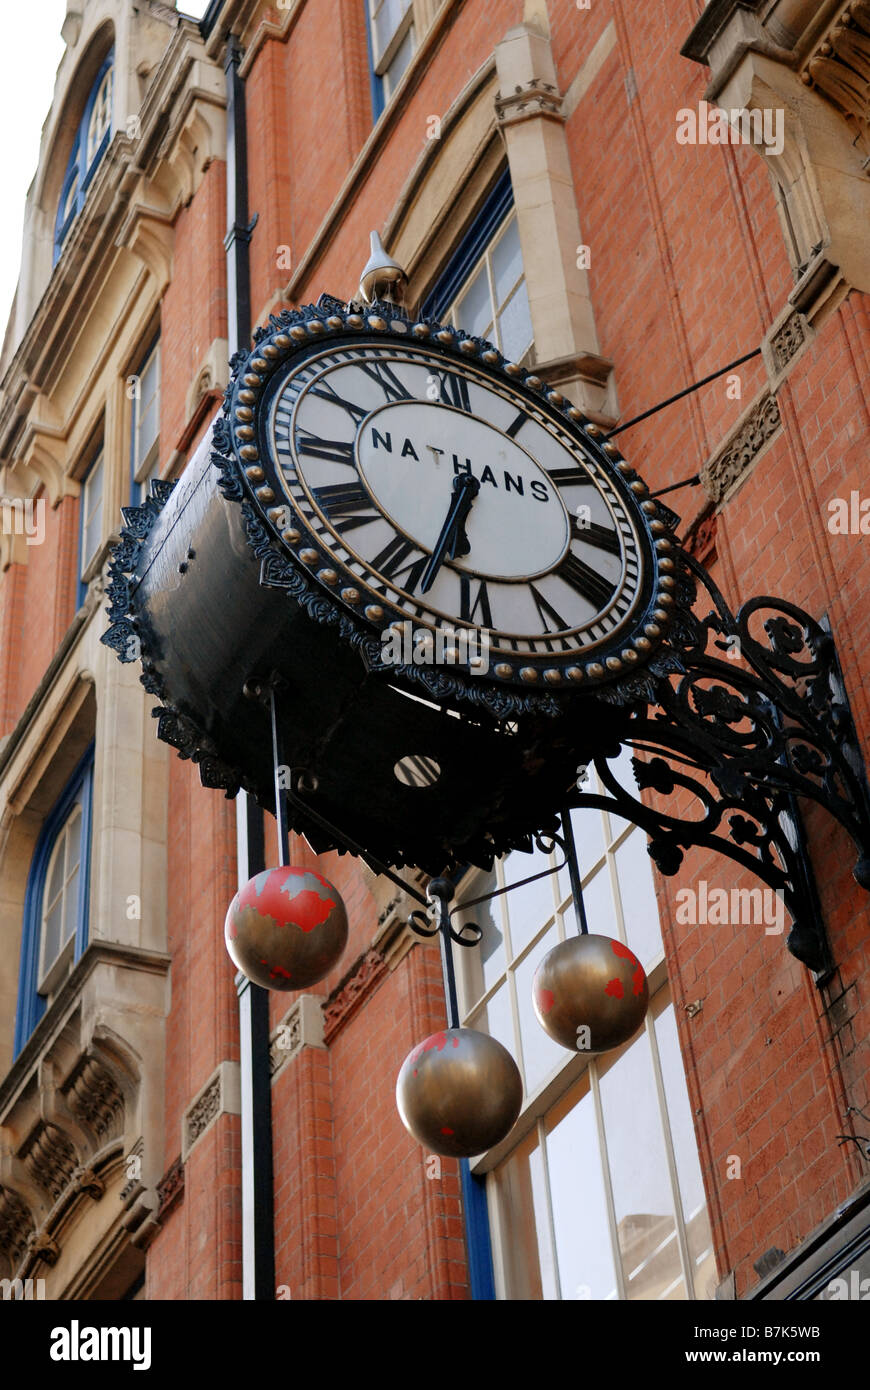 Old clock and pawn shop symbol in Corporation Street Birmingham England Stock Photo